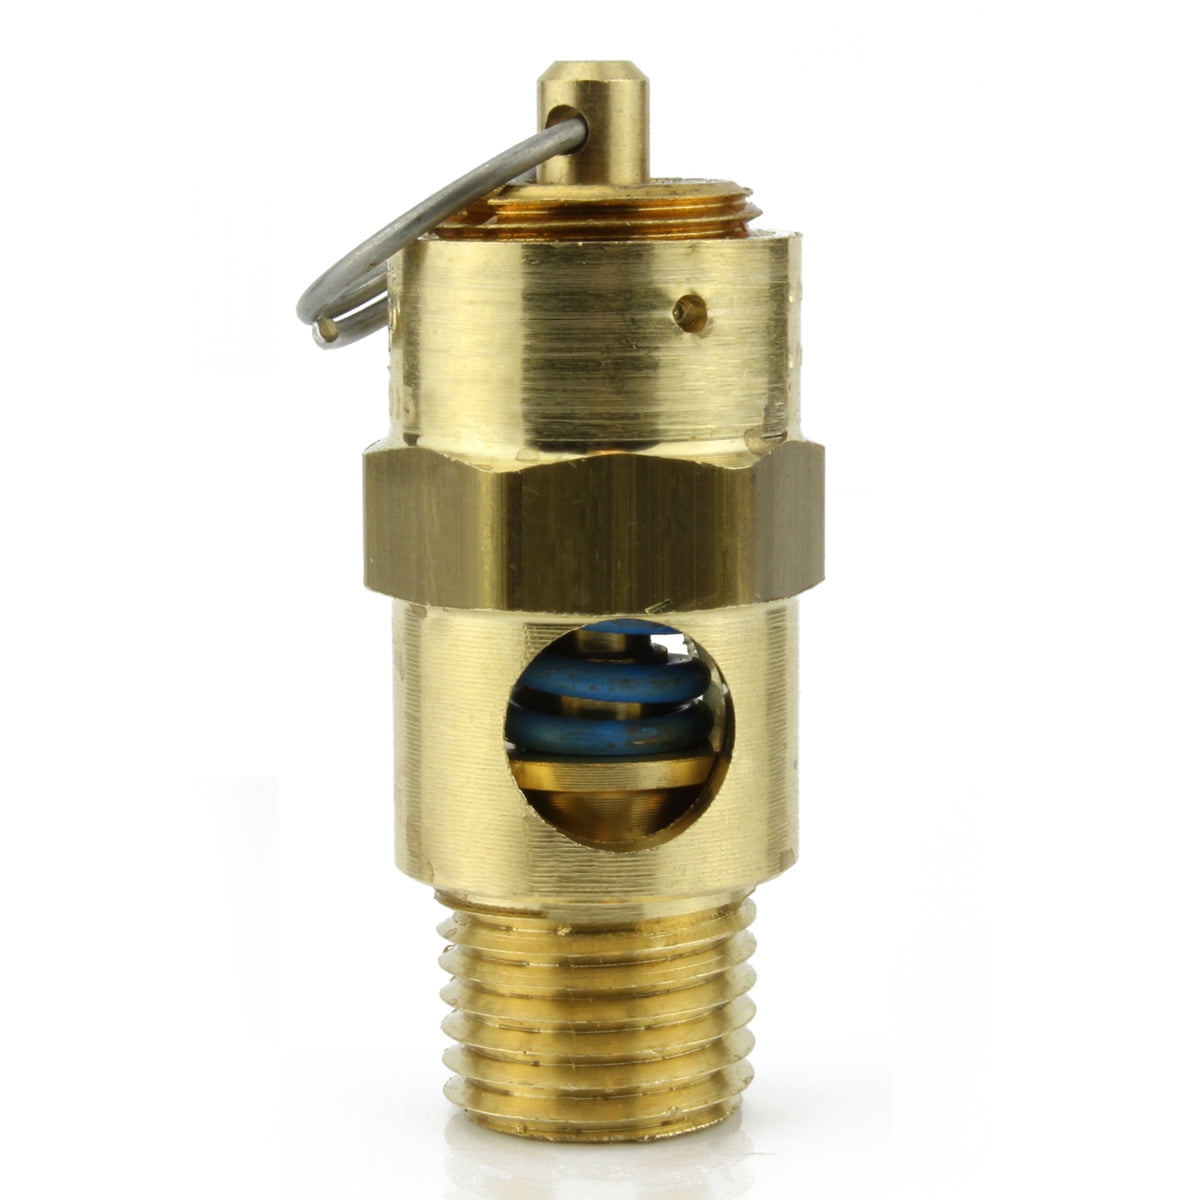 125 PSI SAFETY RELIEF POP OFF VALVE FOR AIR COMPRESSOR TANK RELEASE 3/8" NPT 